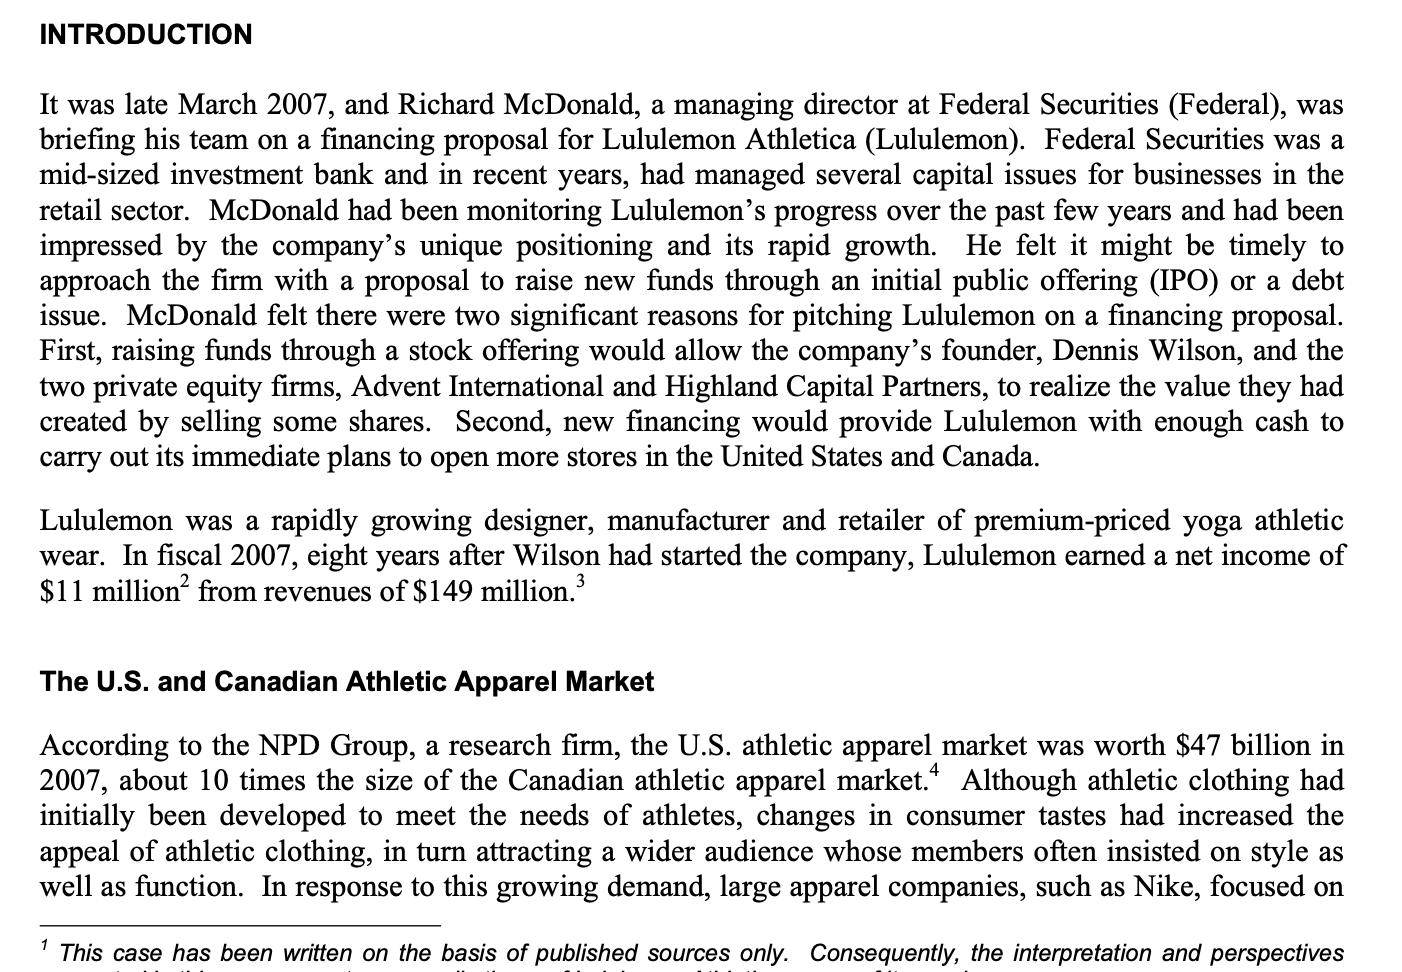 INTRODUCTION It was late March 2007, and Richard McDonald, a managing director at Federal Securities (Federal), was briefing